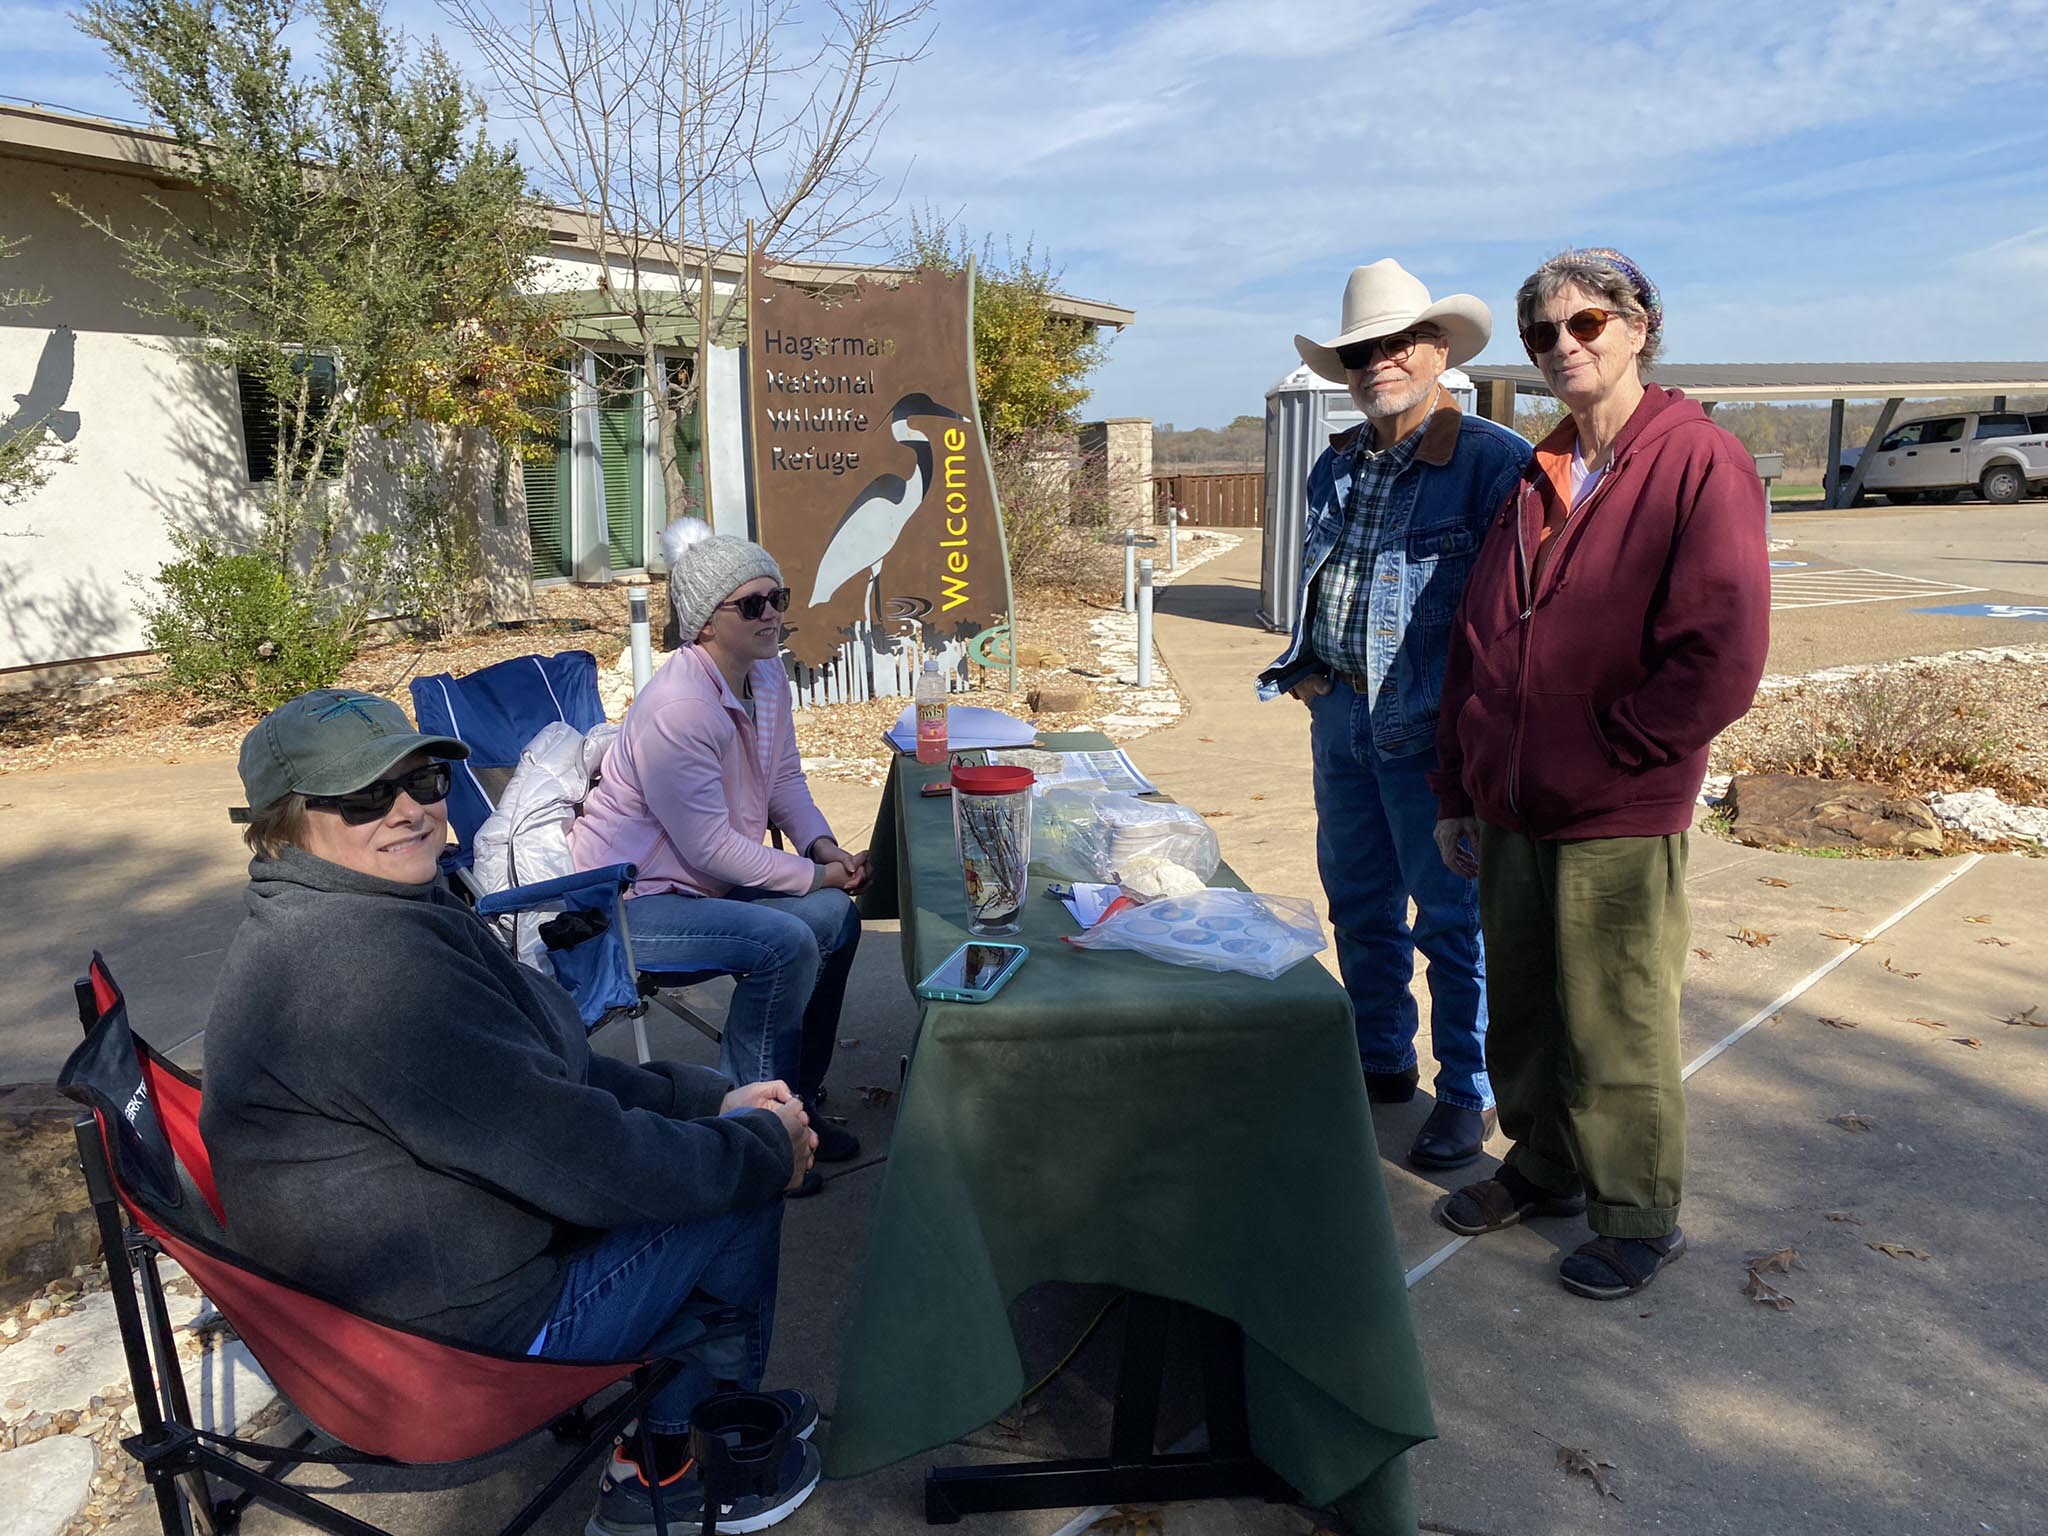 Greet visitors and work the information booth at Hagerman NWR